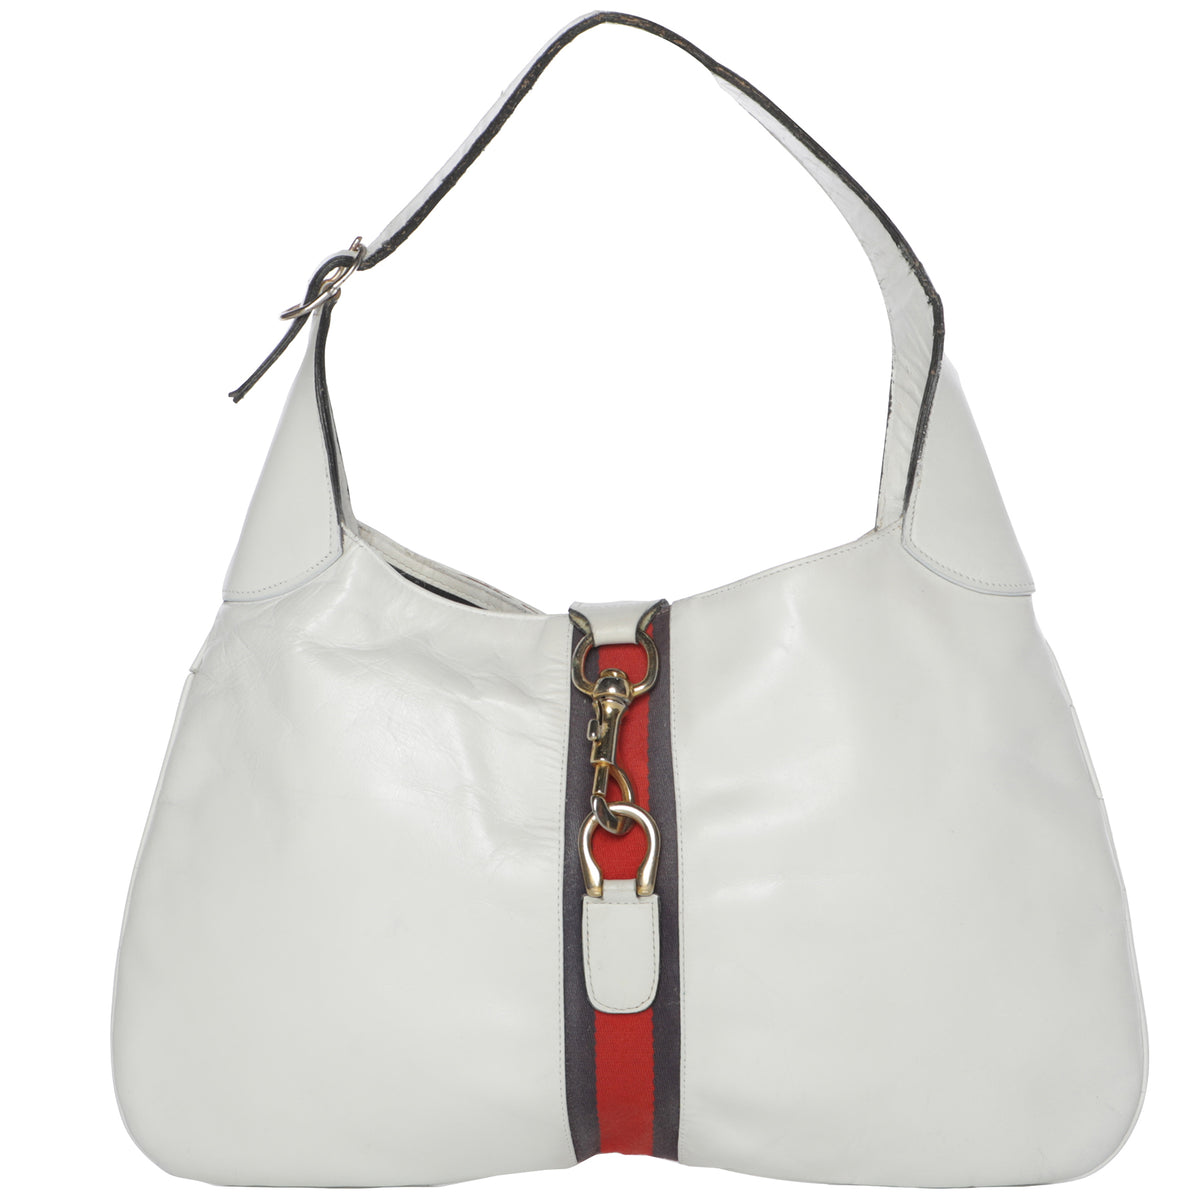 Gucci Jackie 1961 Small Shoulder Bag in Red